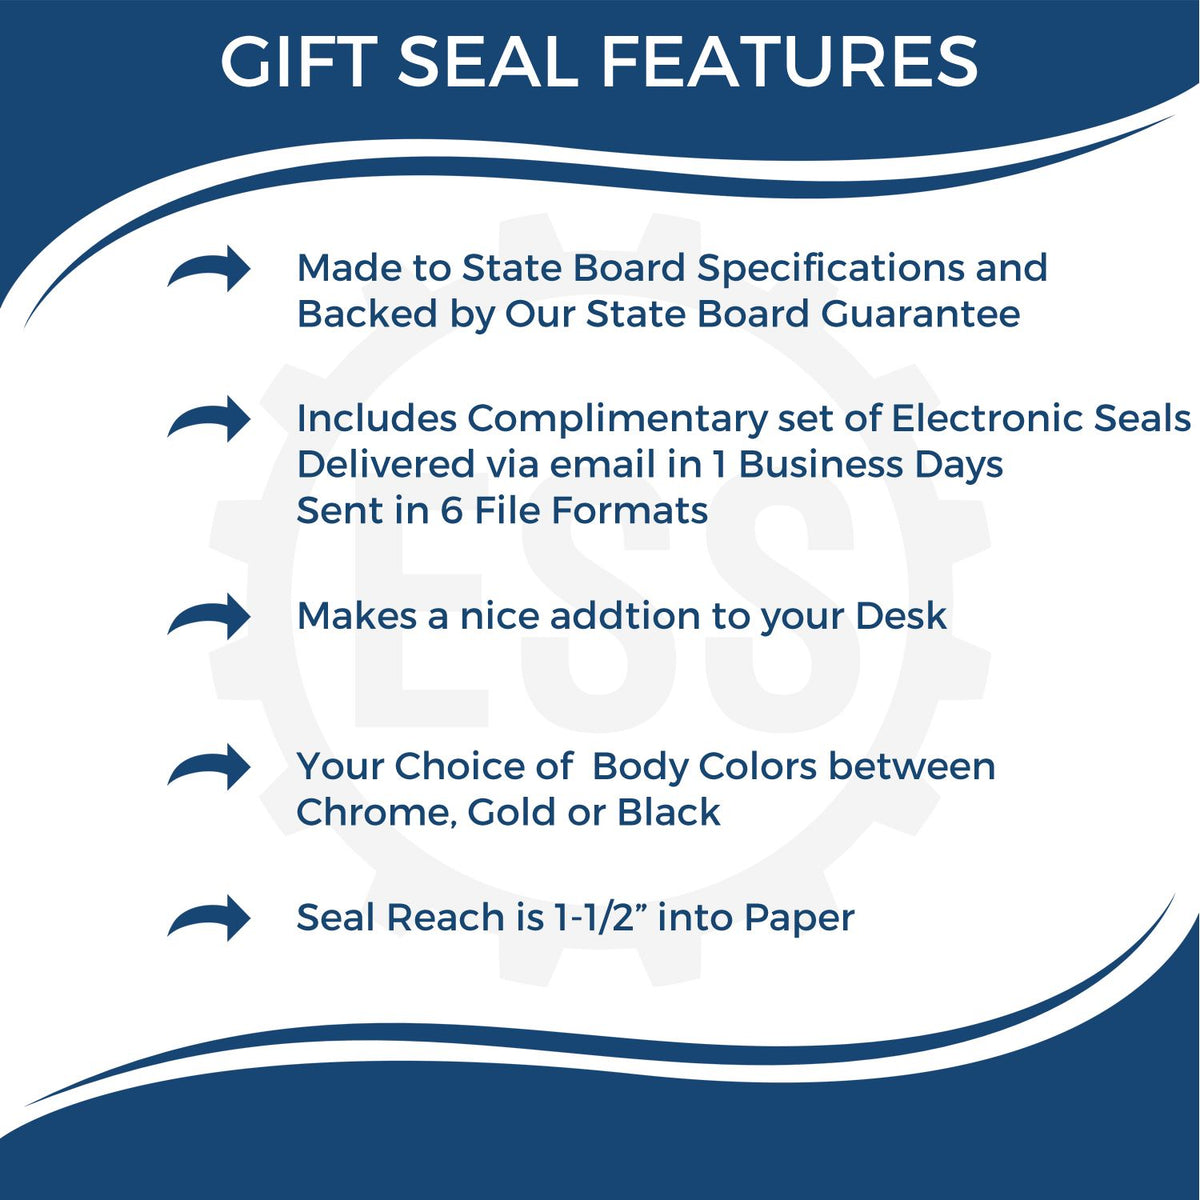 A picture of an infographic highlighting the selling points for the Gift Mississippi Engineer Seal